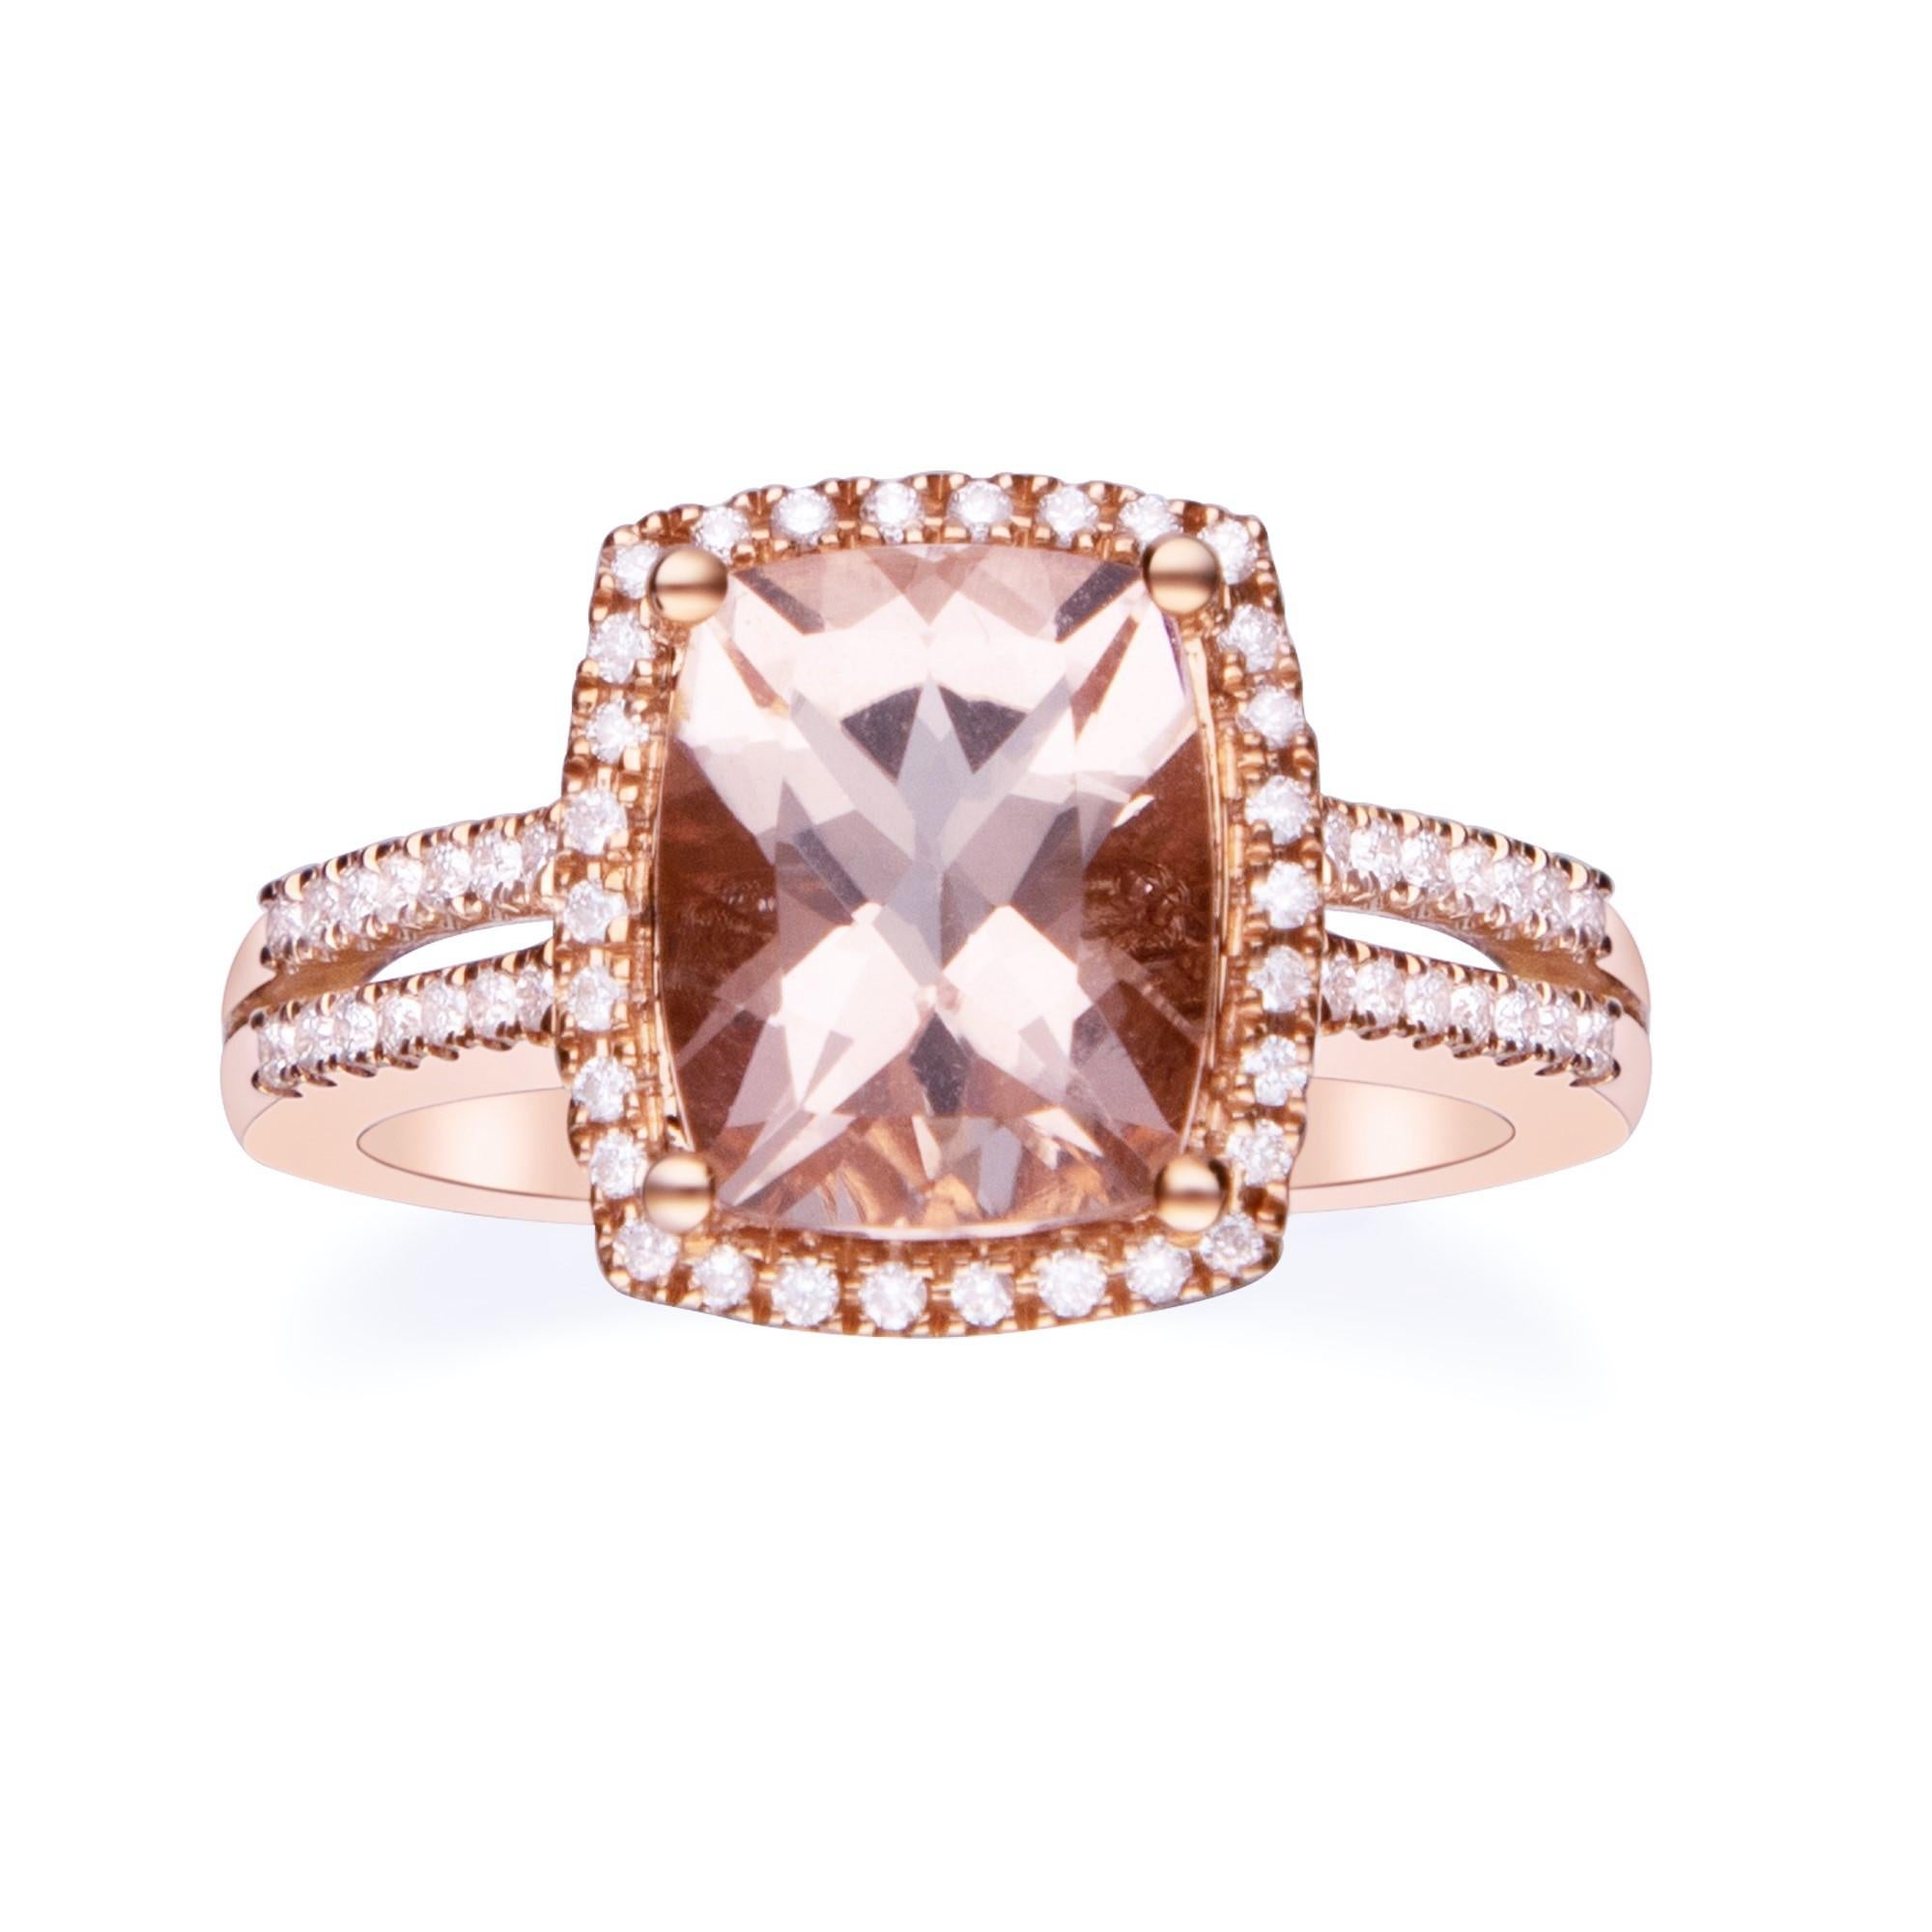 This beautiful Morganite ring is crafted in 14-karat Rose gold and features a 2.60 carat Genuine cushion cut Morganite, 58 Round White Diamonds in GH- I1 quality with 0.25 carat in a prong-setting. This ring comes in sizes 6 to 9, and it is a